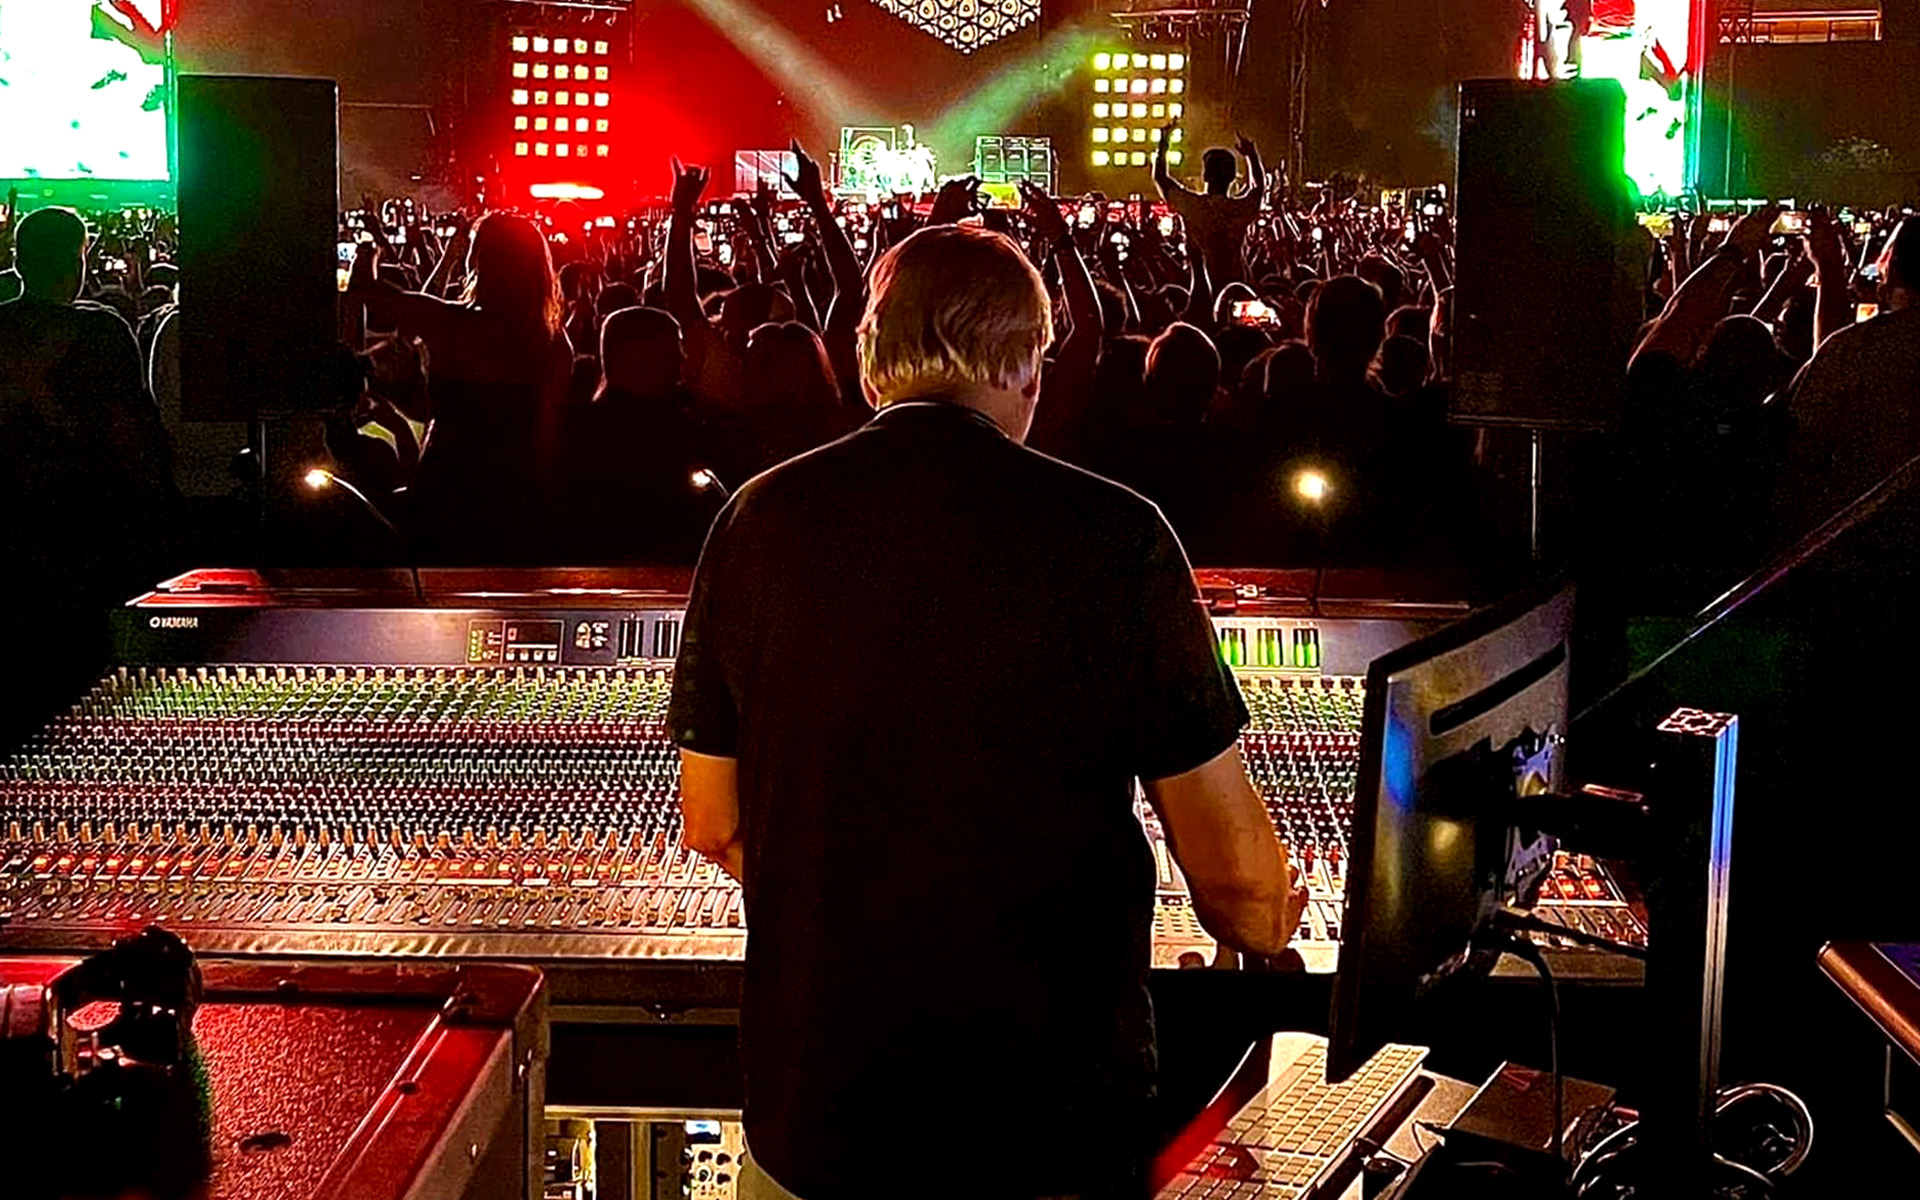 Sound engineer Toby Francis stands at the console, mixing front of house for the Red Hot Chili Peppers.